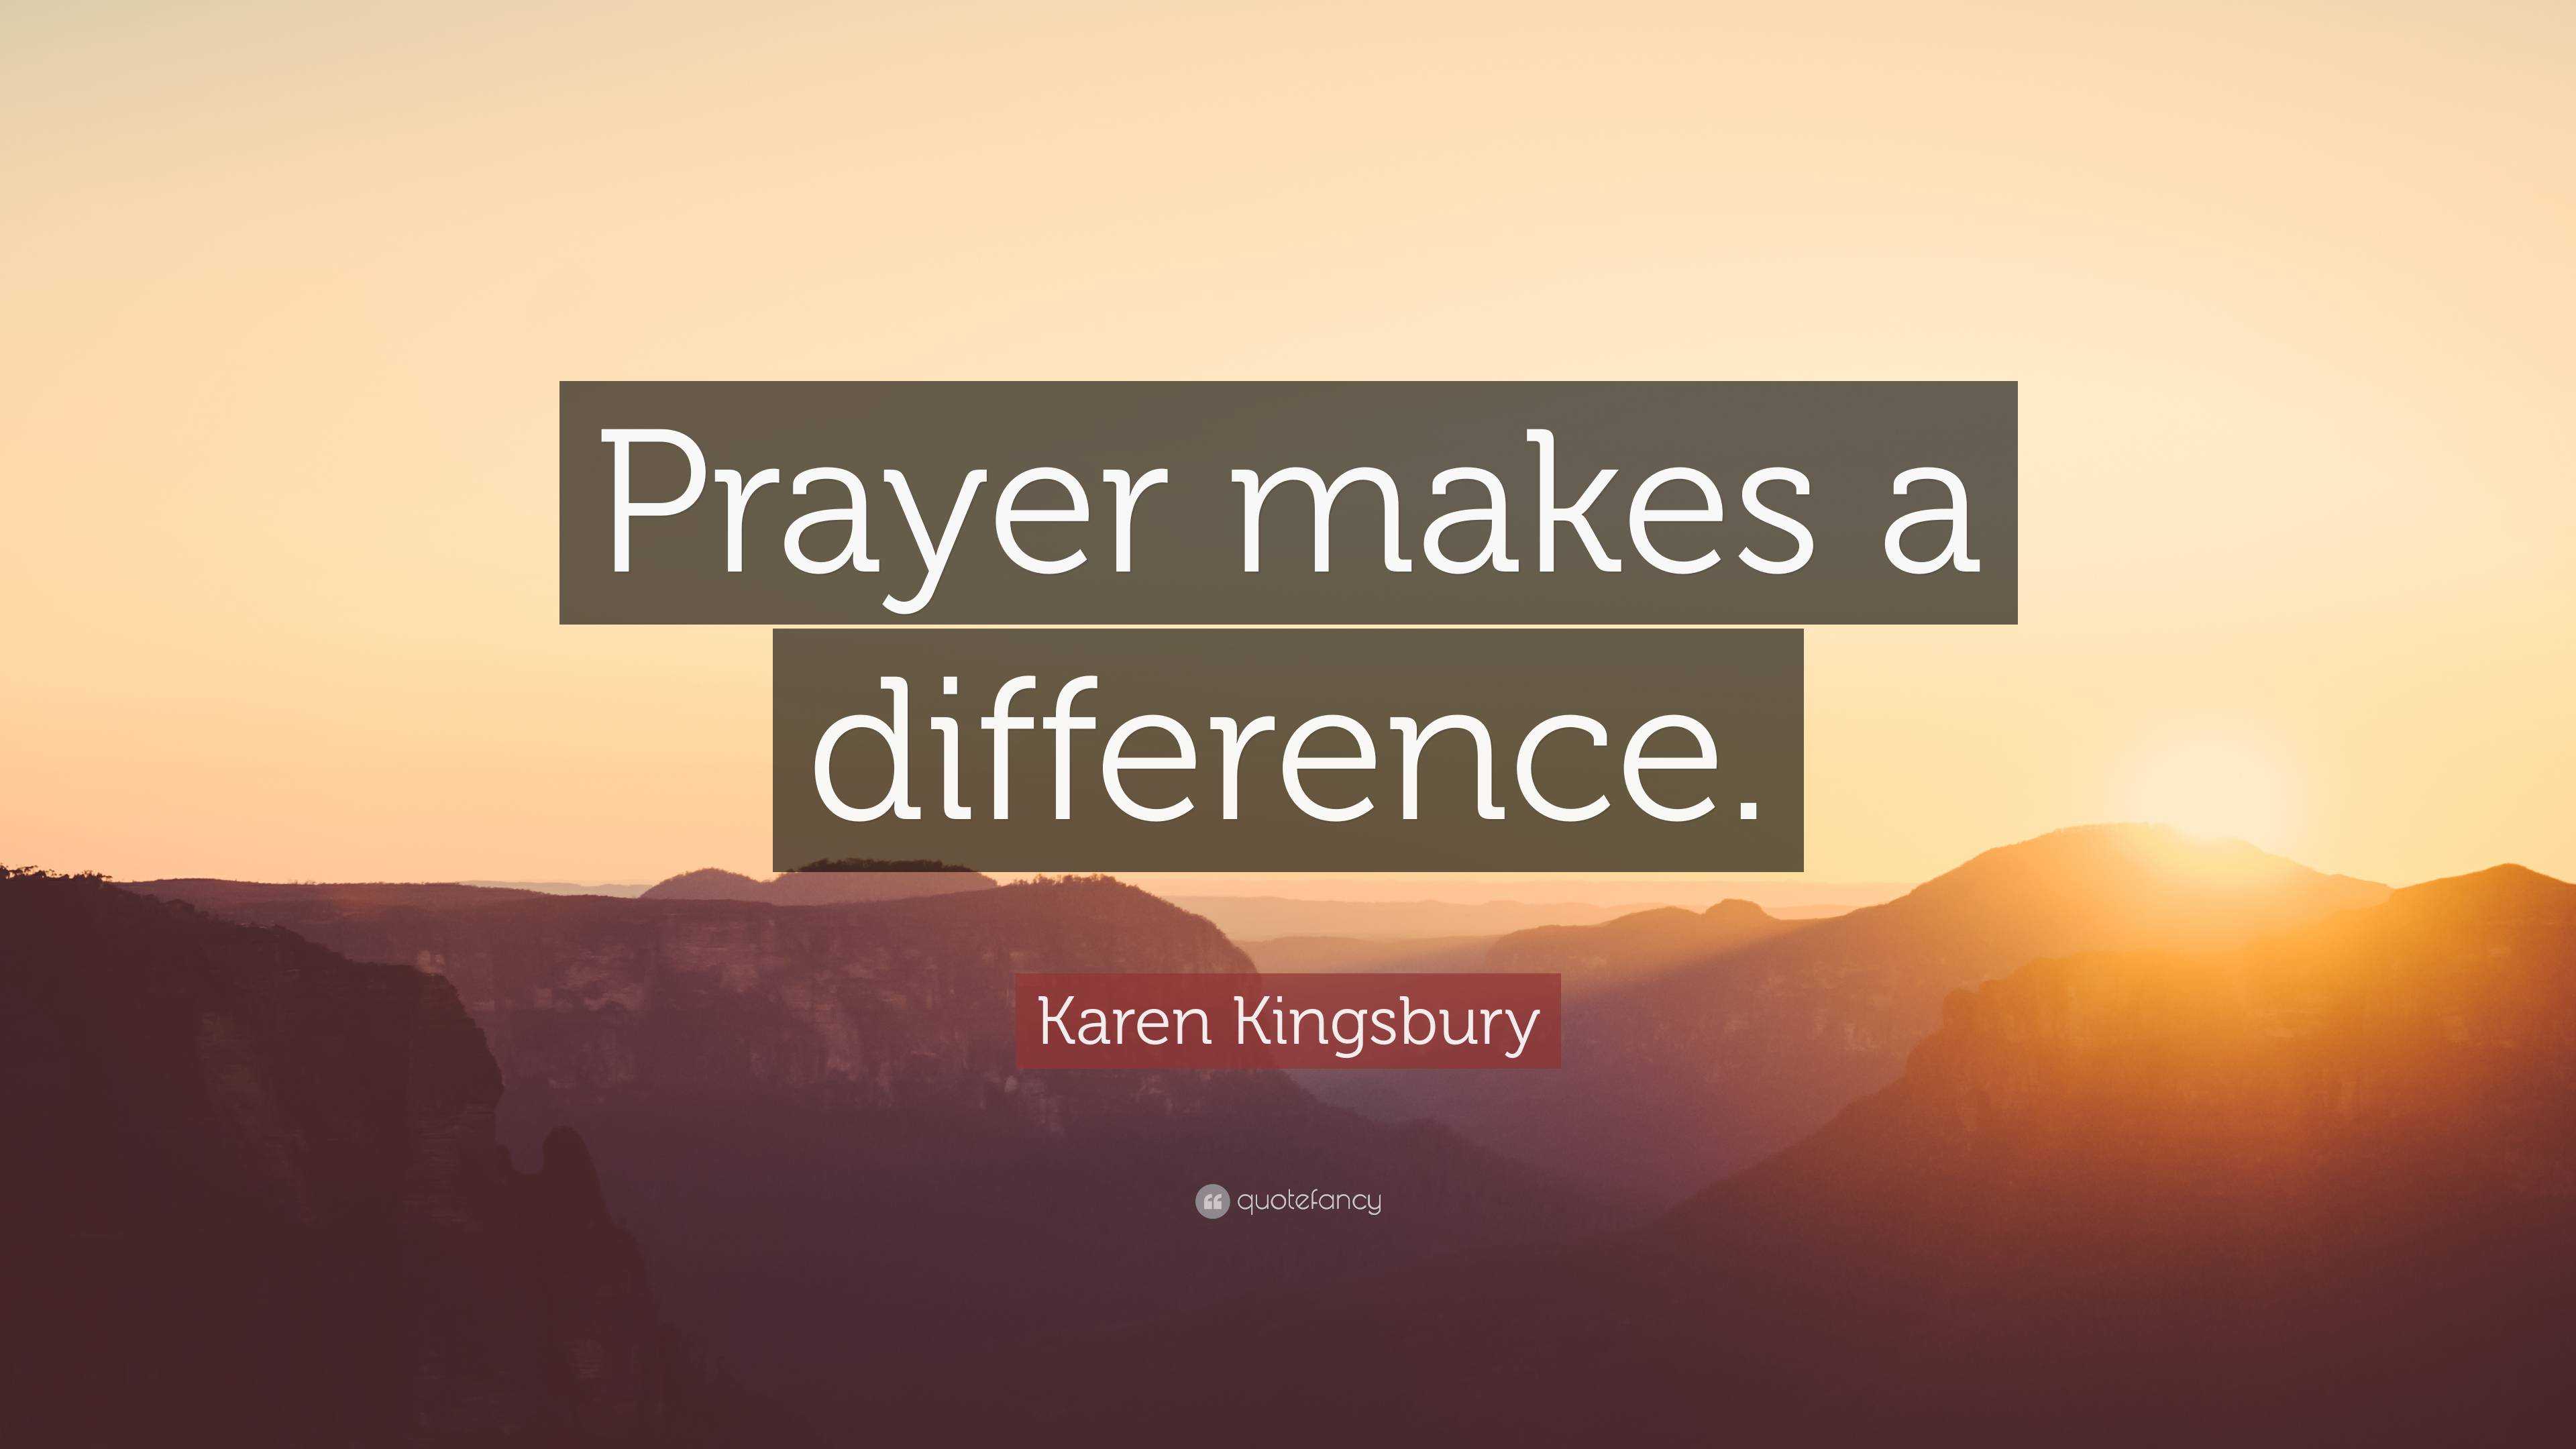 Karen Kingsbury Quote: “Prayer makes a difference.”